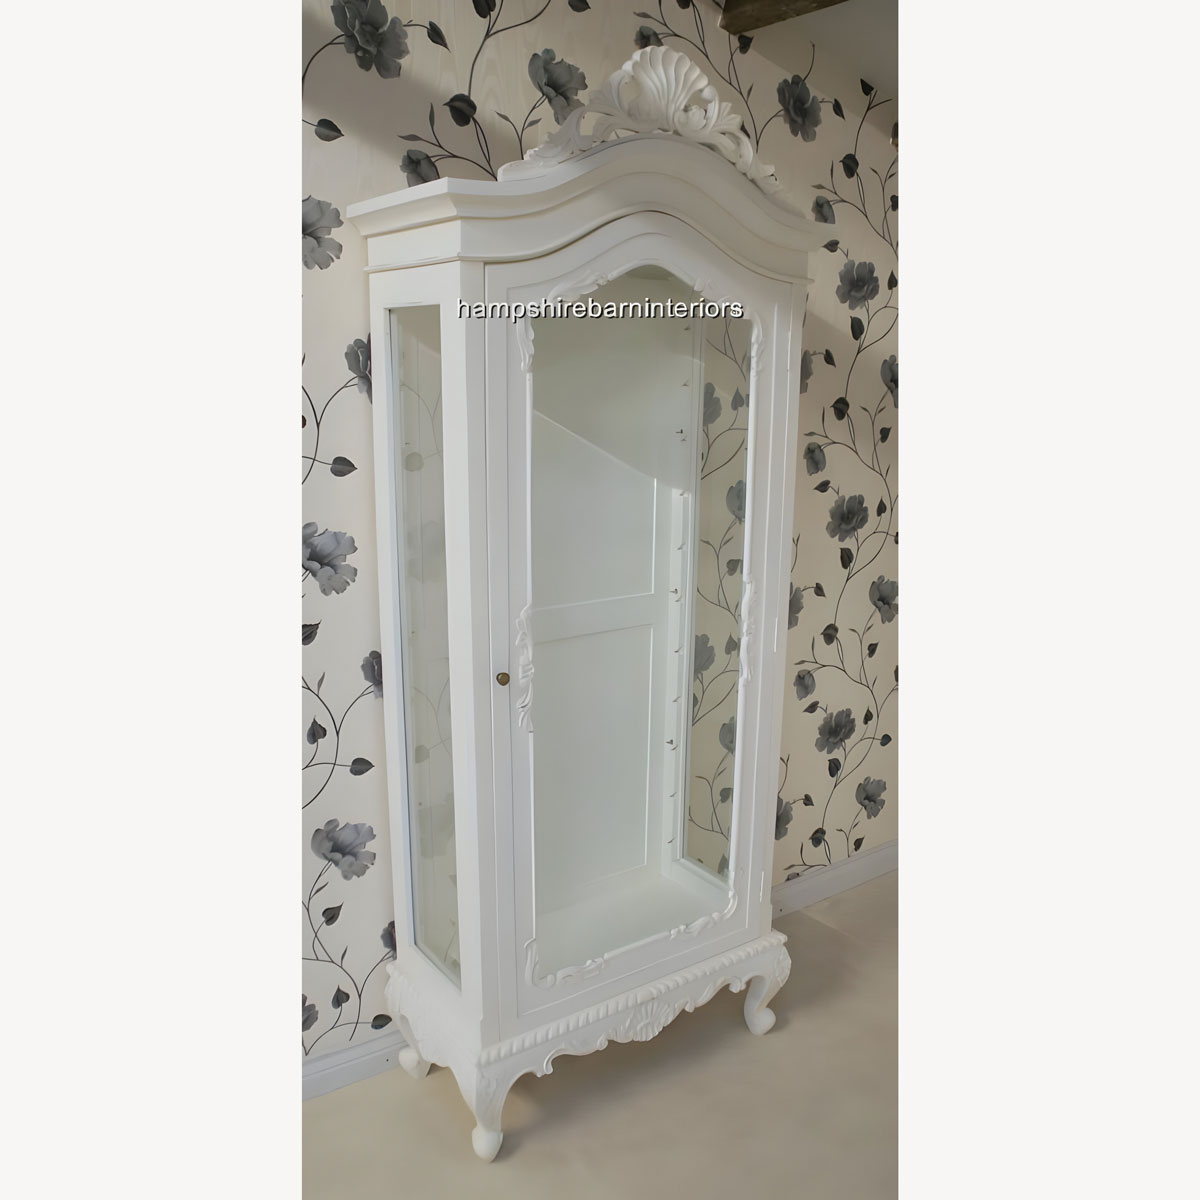 Antique White Display Cabinet Louis Style Wall Unit Display Cabinet French Style Chic Distressed Painted 5 - Hampshire Barn Interiors - Antique White Display Cabinet Louis Style Wall Unit Display Cabinet French Style Chic Distressed Painted -